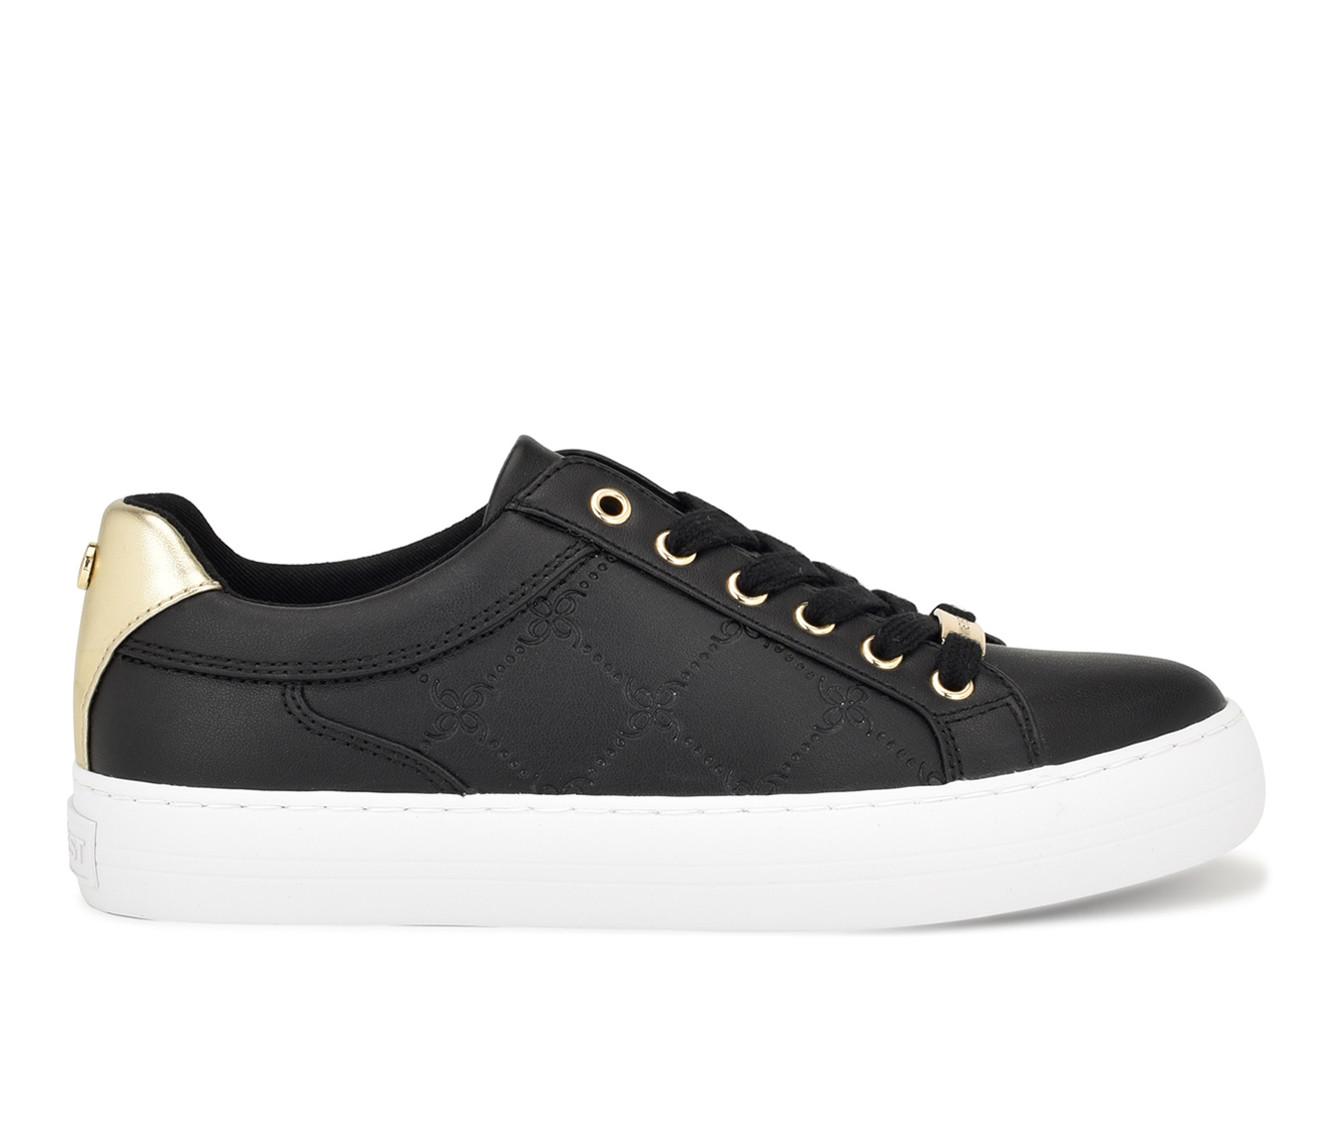 Women's Nine West Givens Fashion Sneakers